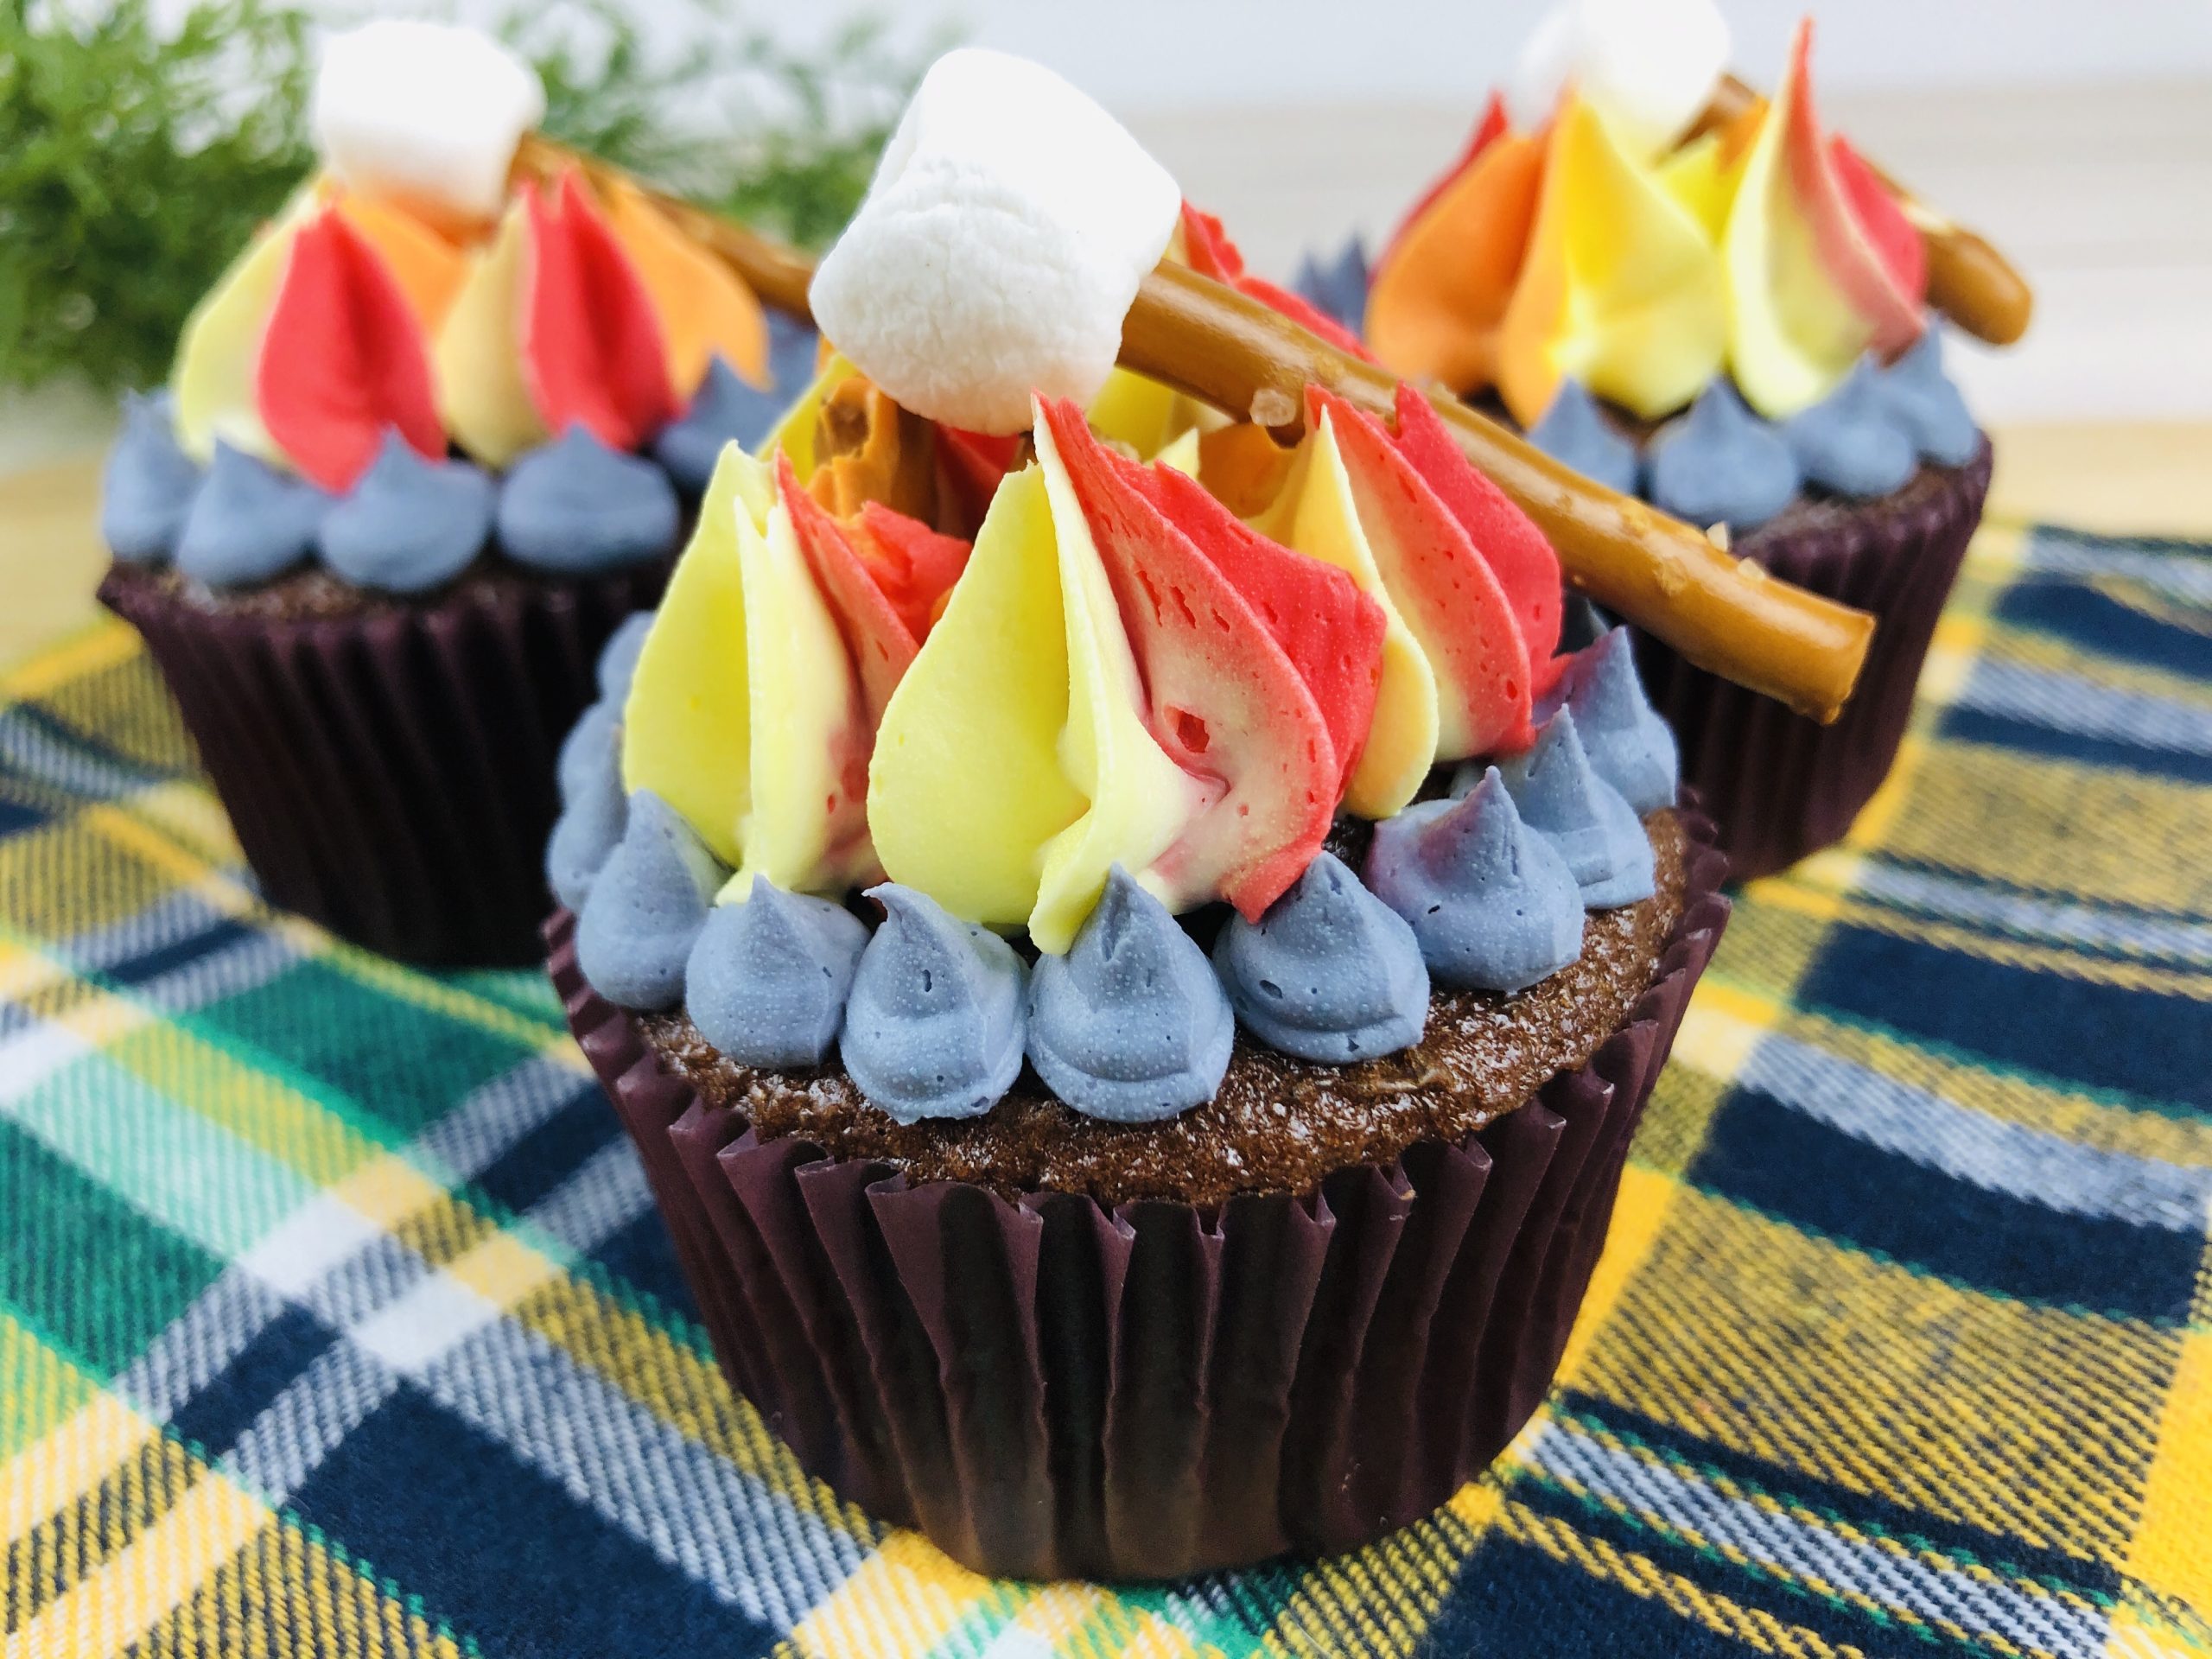 How to Make Campfire Camping Cupcakes